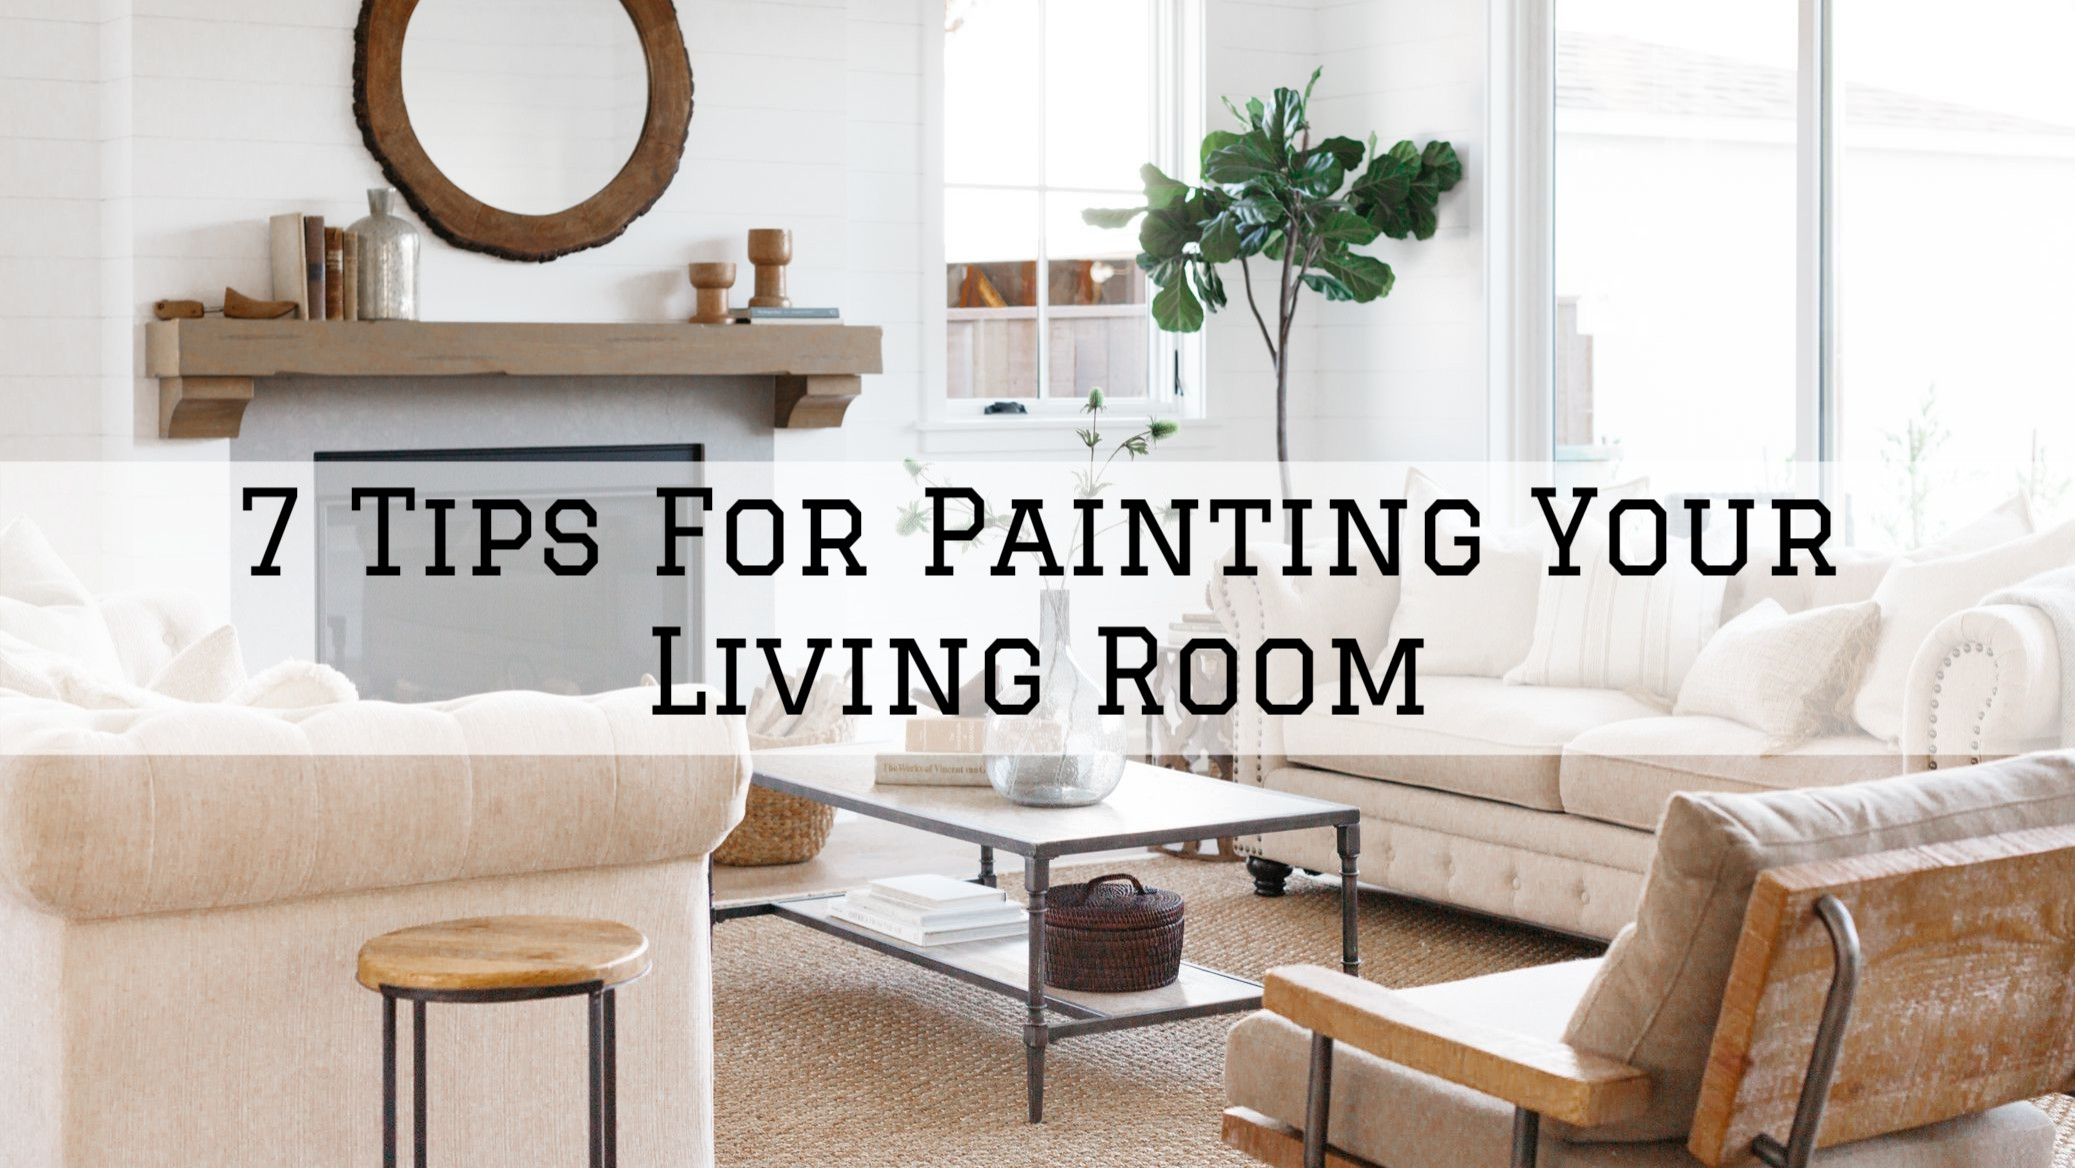 28-08-2021 Steves Quality Painting And Washing Green Lake WI tips for painting your living room